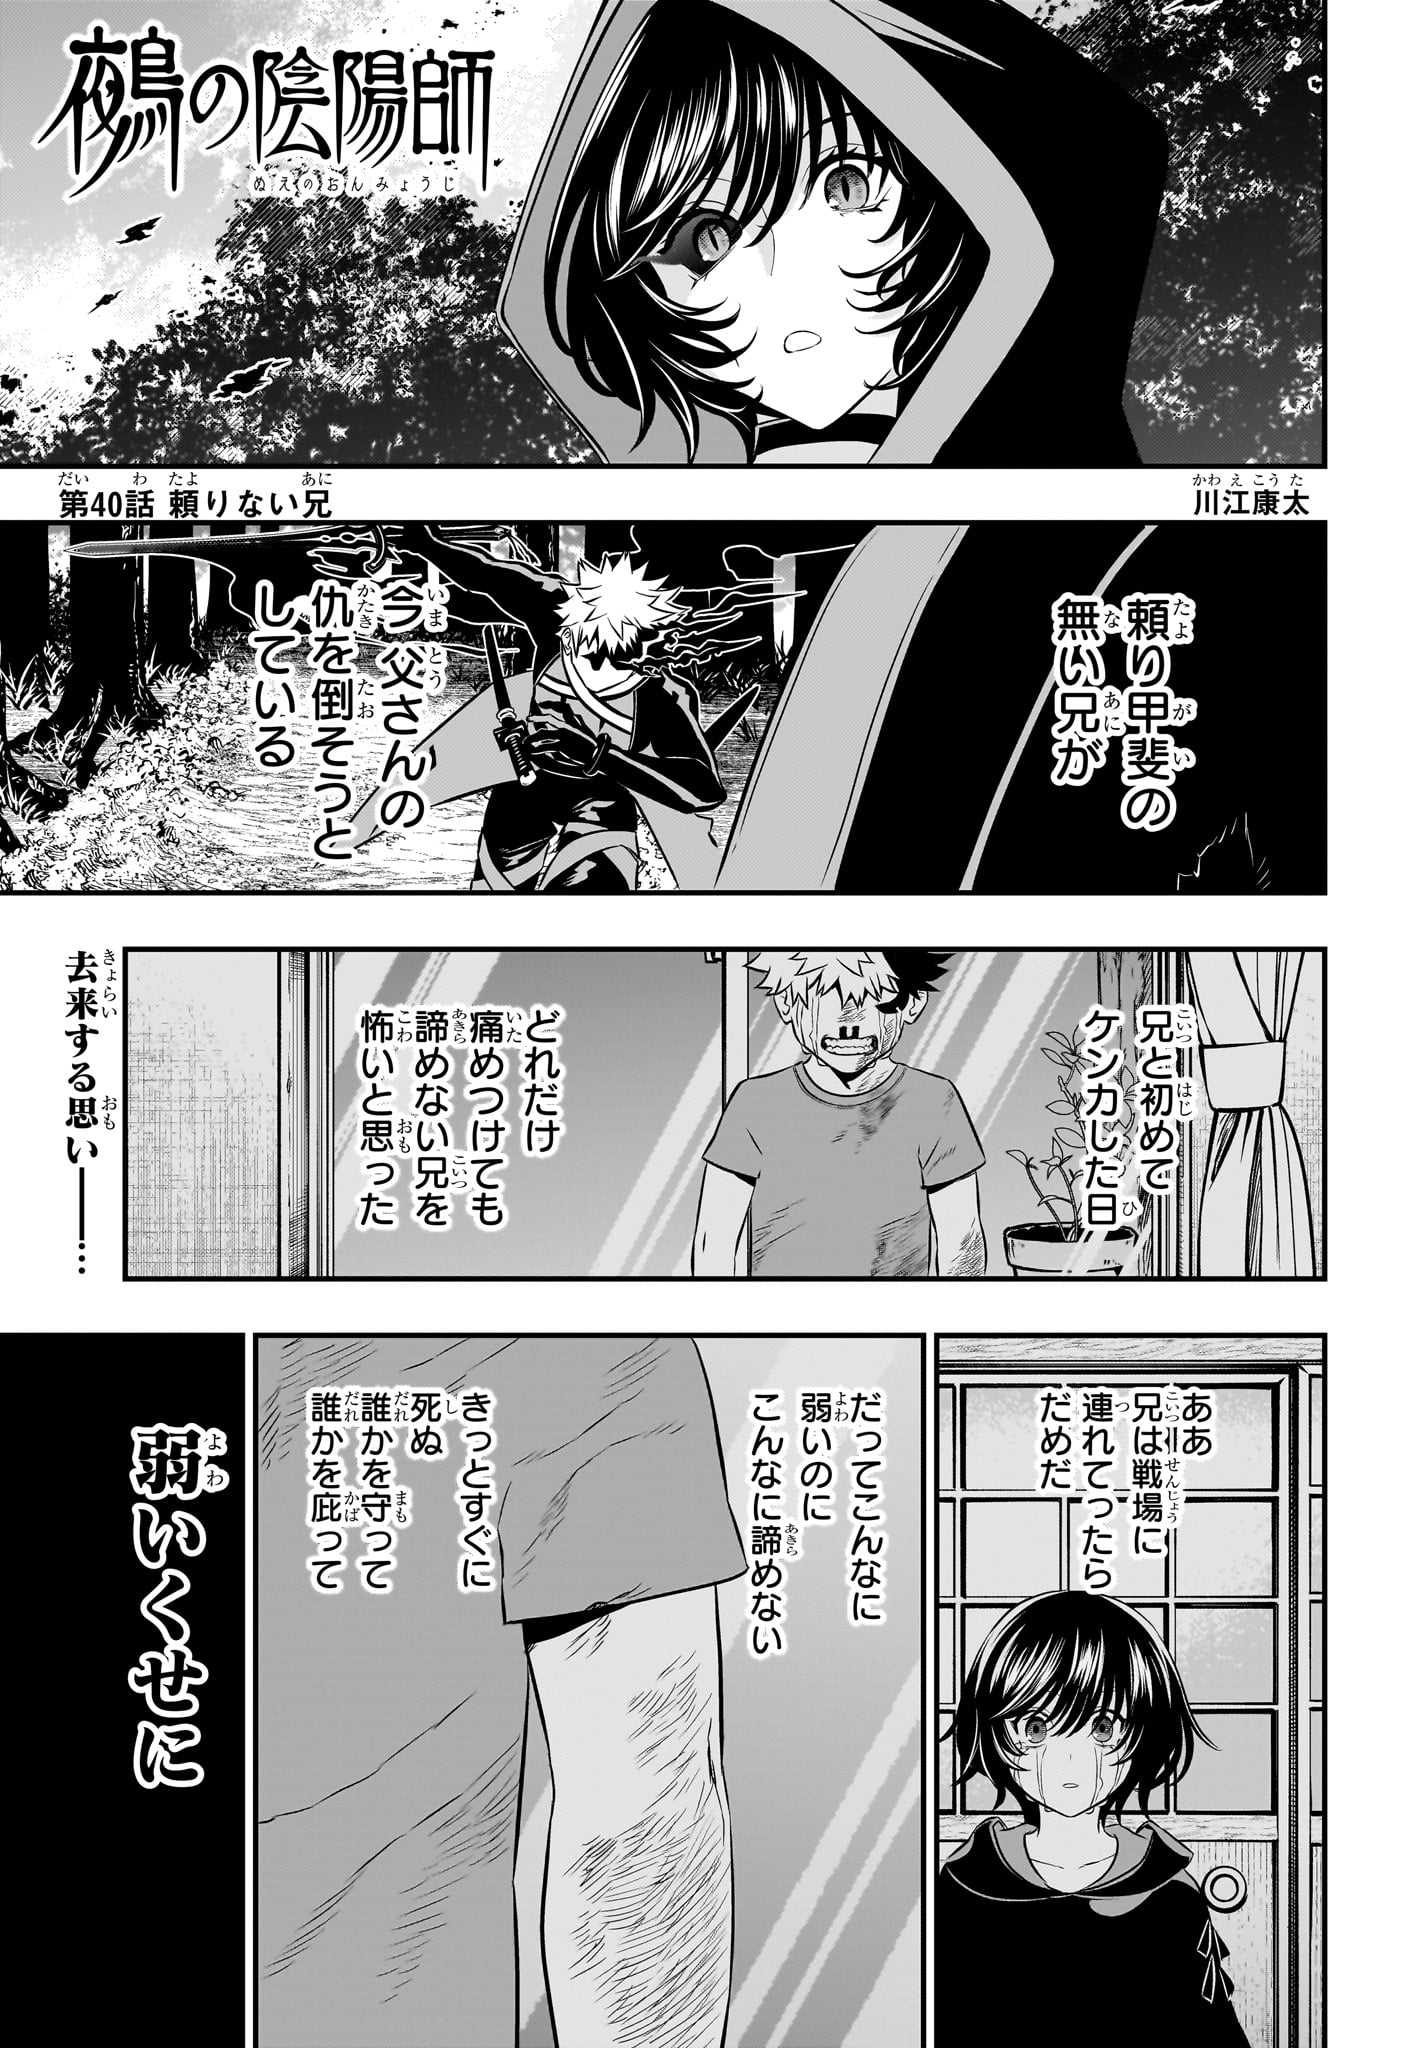 Nue no Onmyouji - Chapter 40 - Page 1